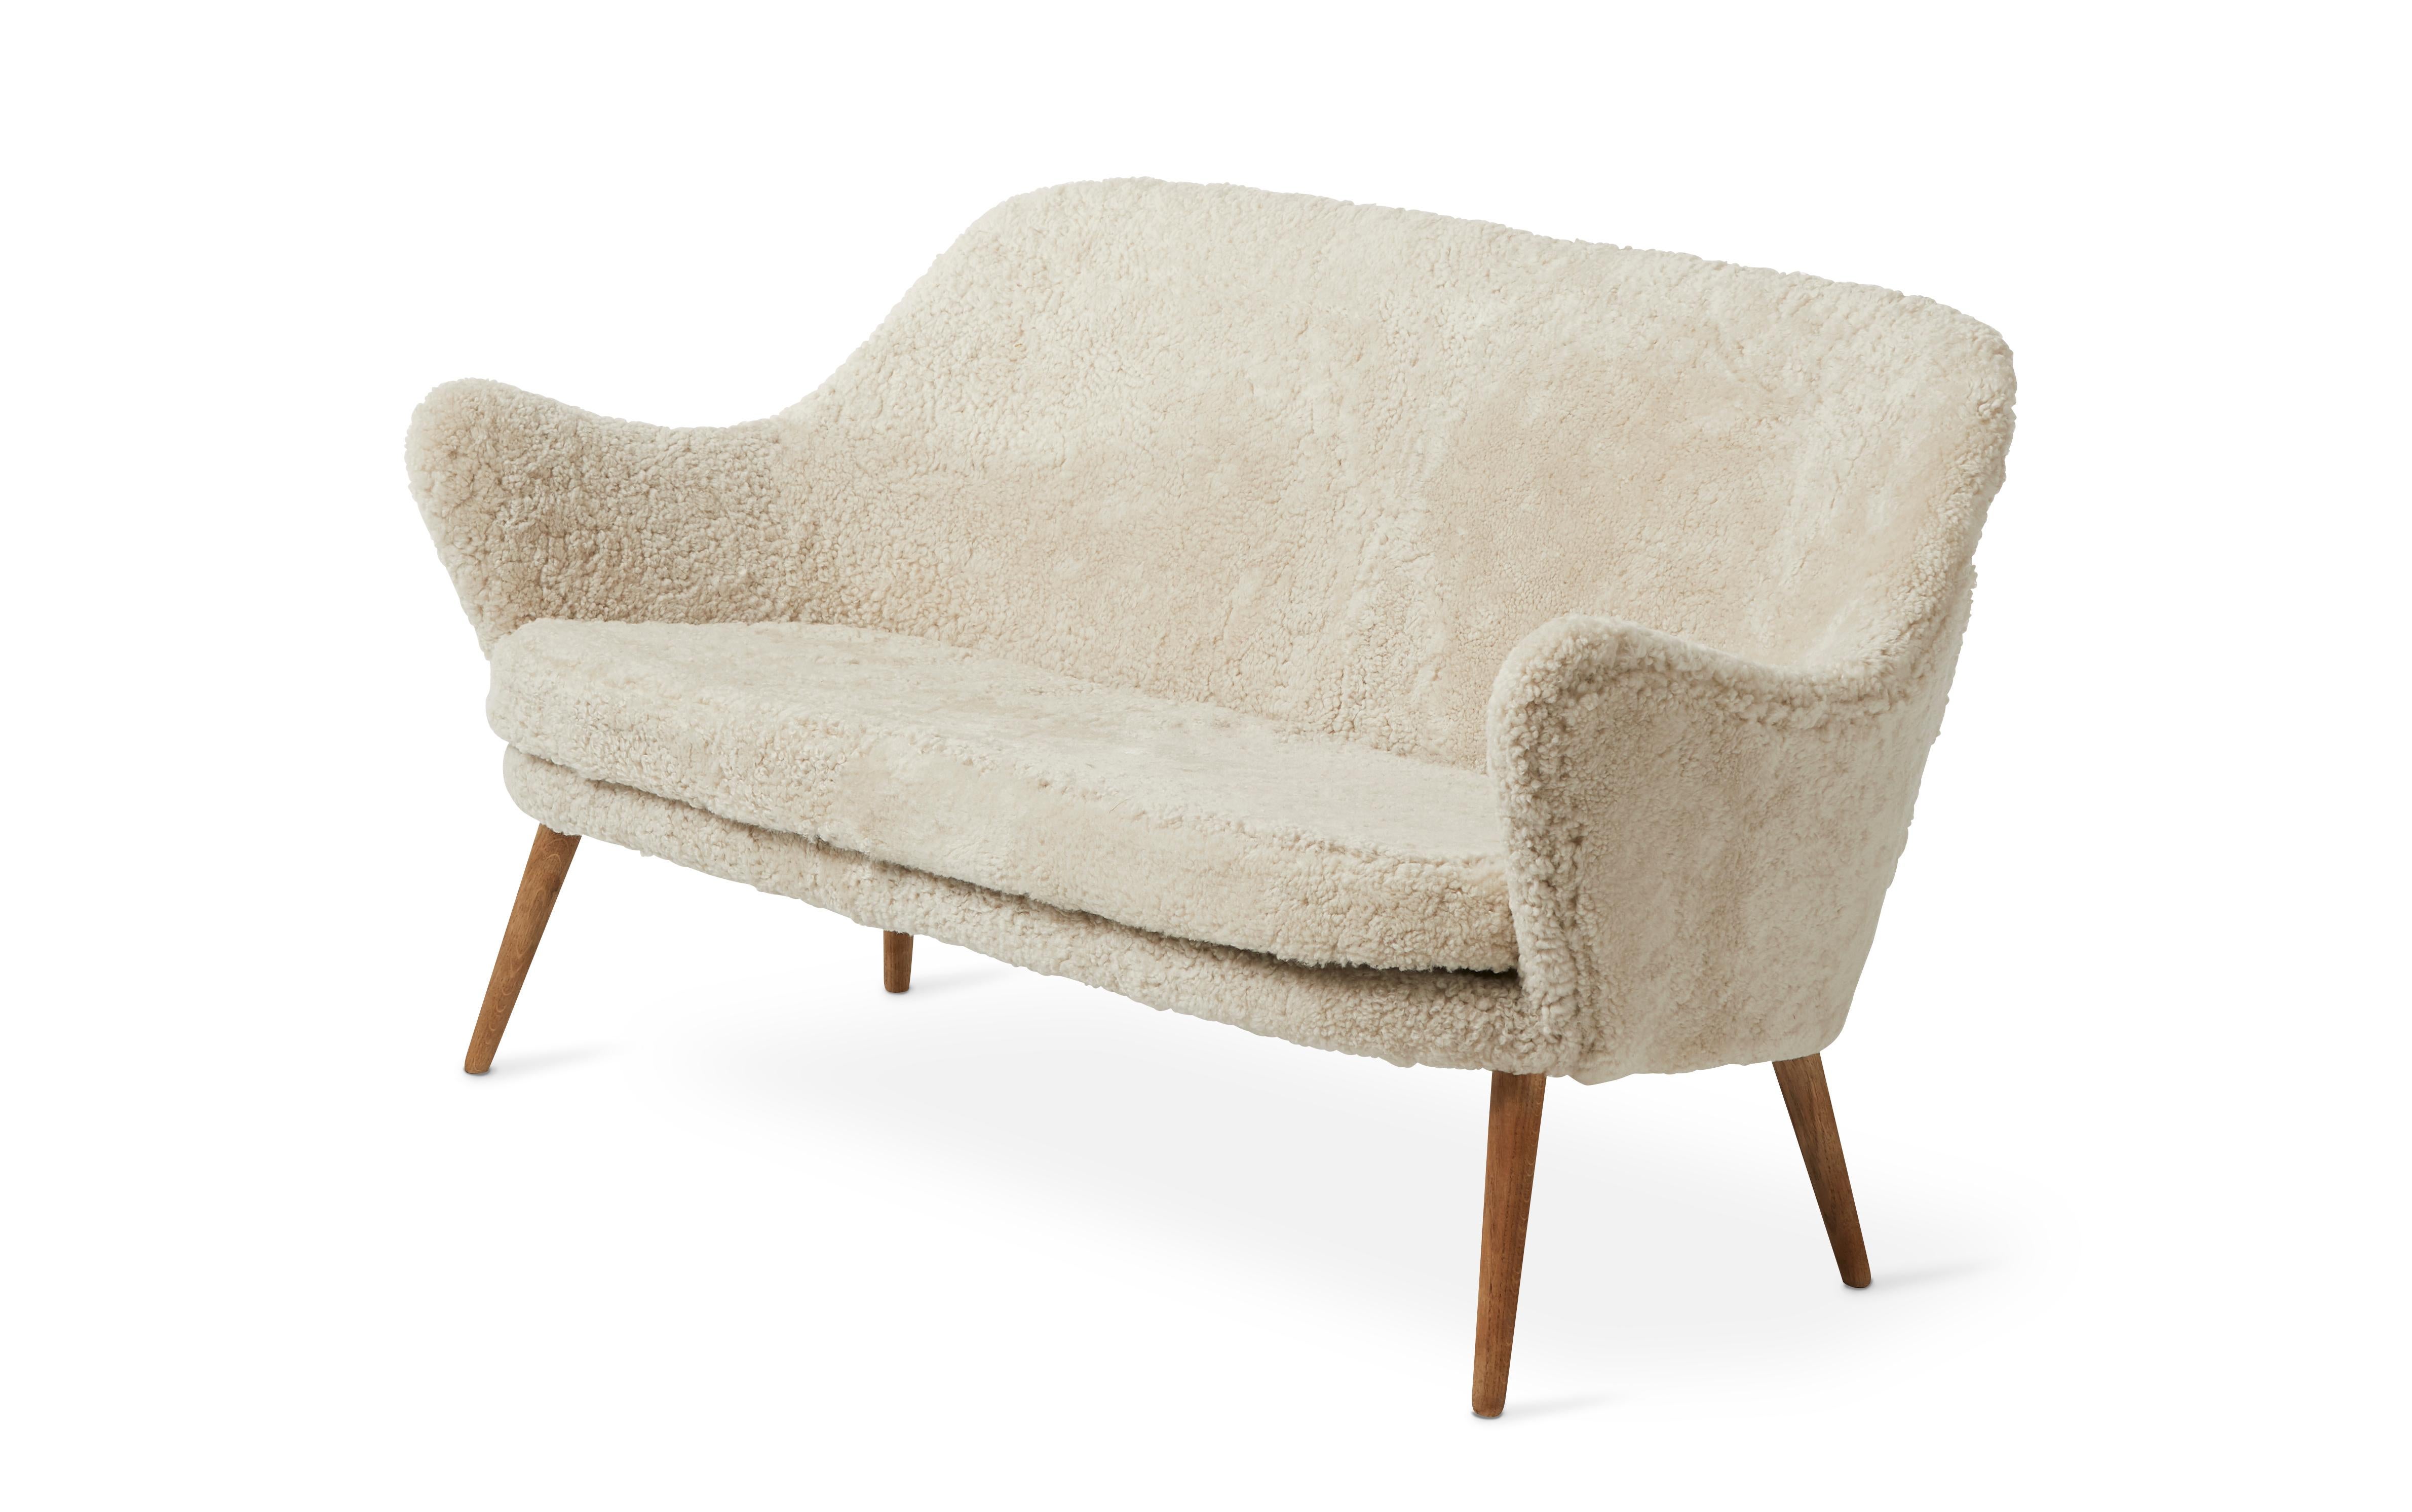 For Sale: White (Sheepskin Moonlight) Dwell 2-Seat Sofa, by Hans Olsen from Warm Nordic 2